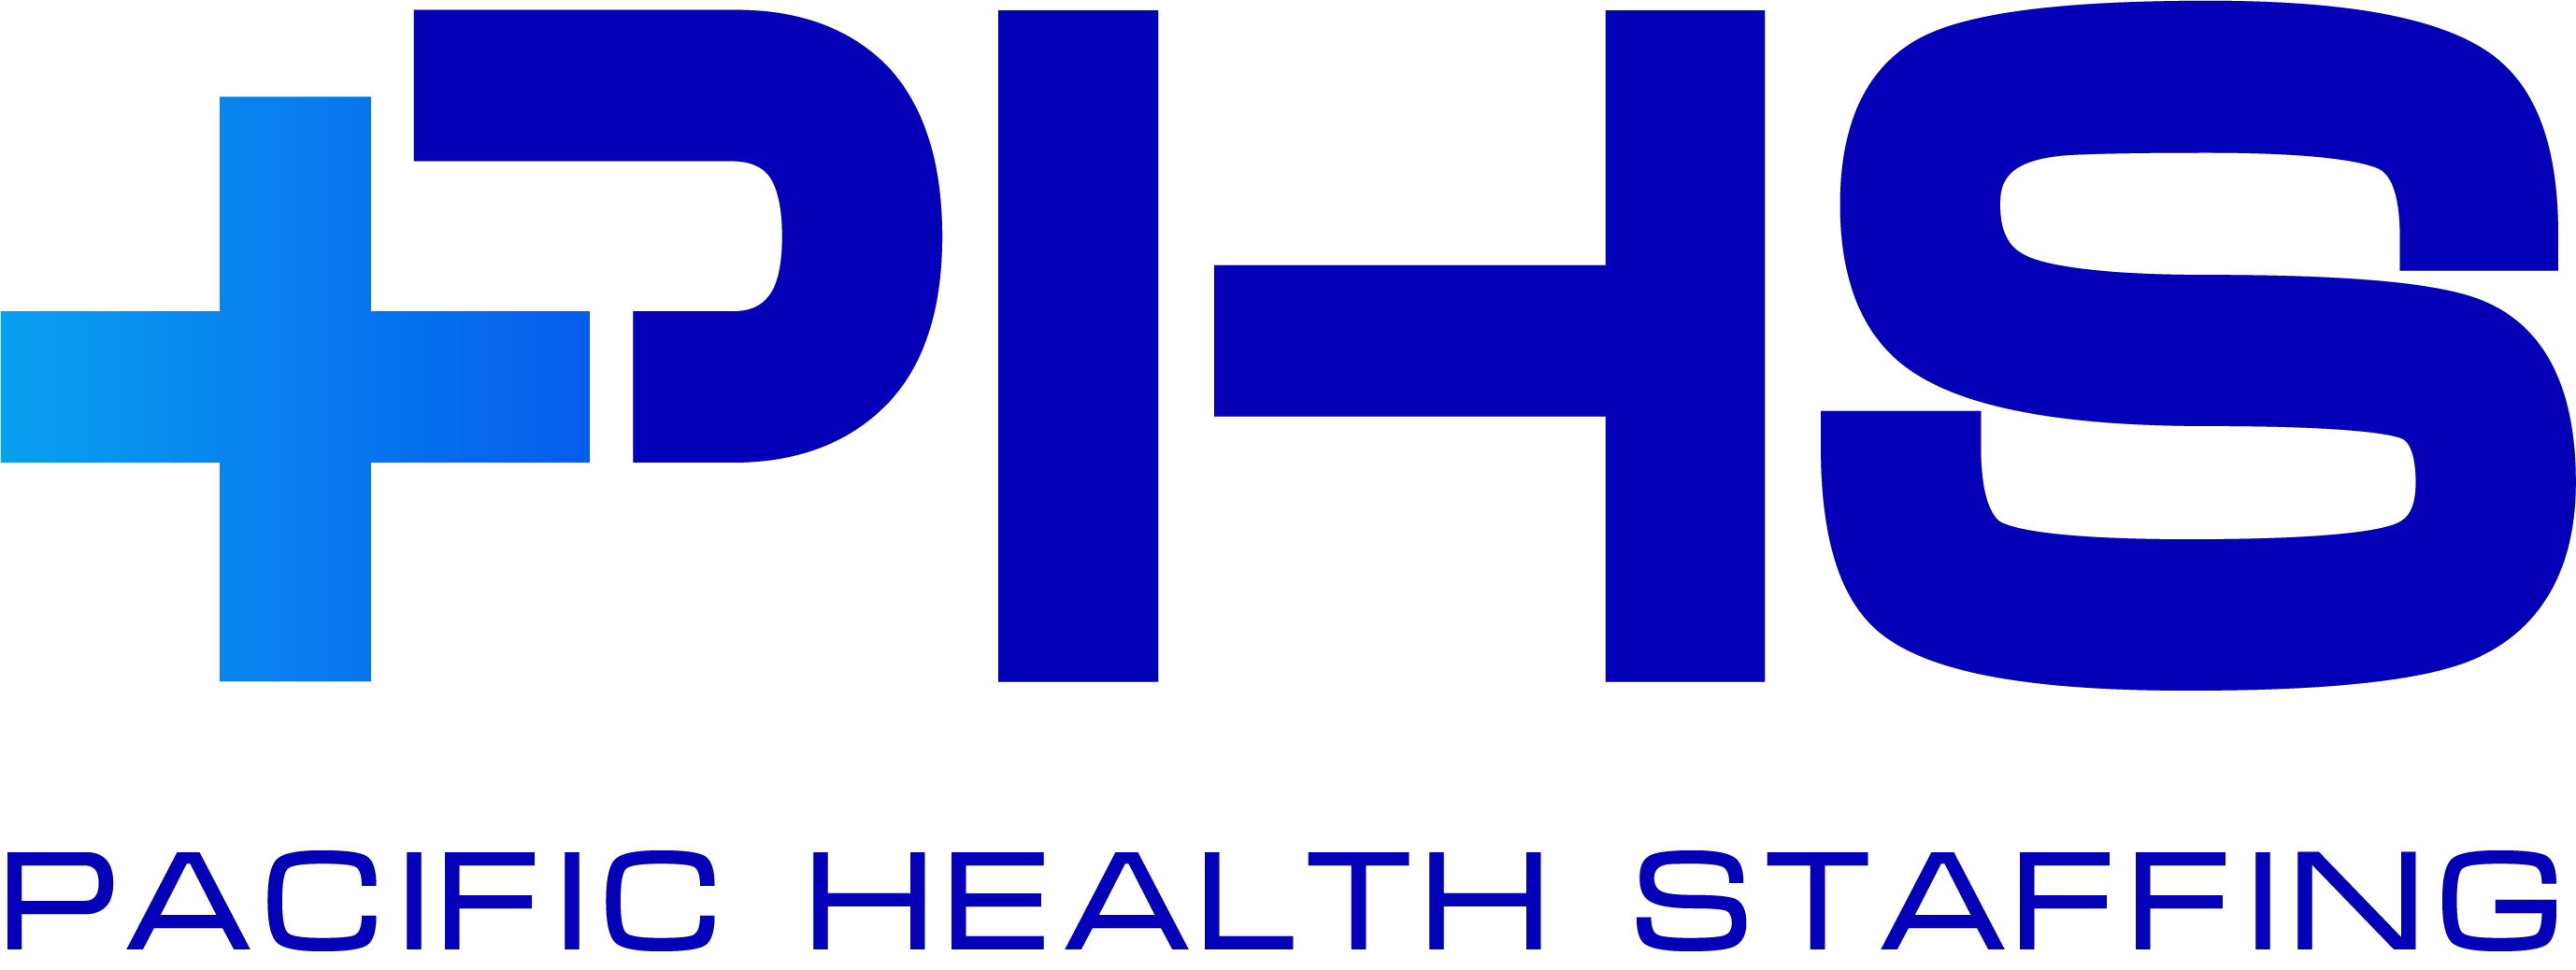 Pacific Health Staffing